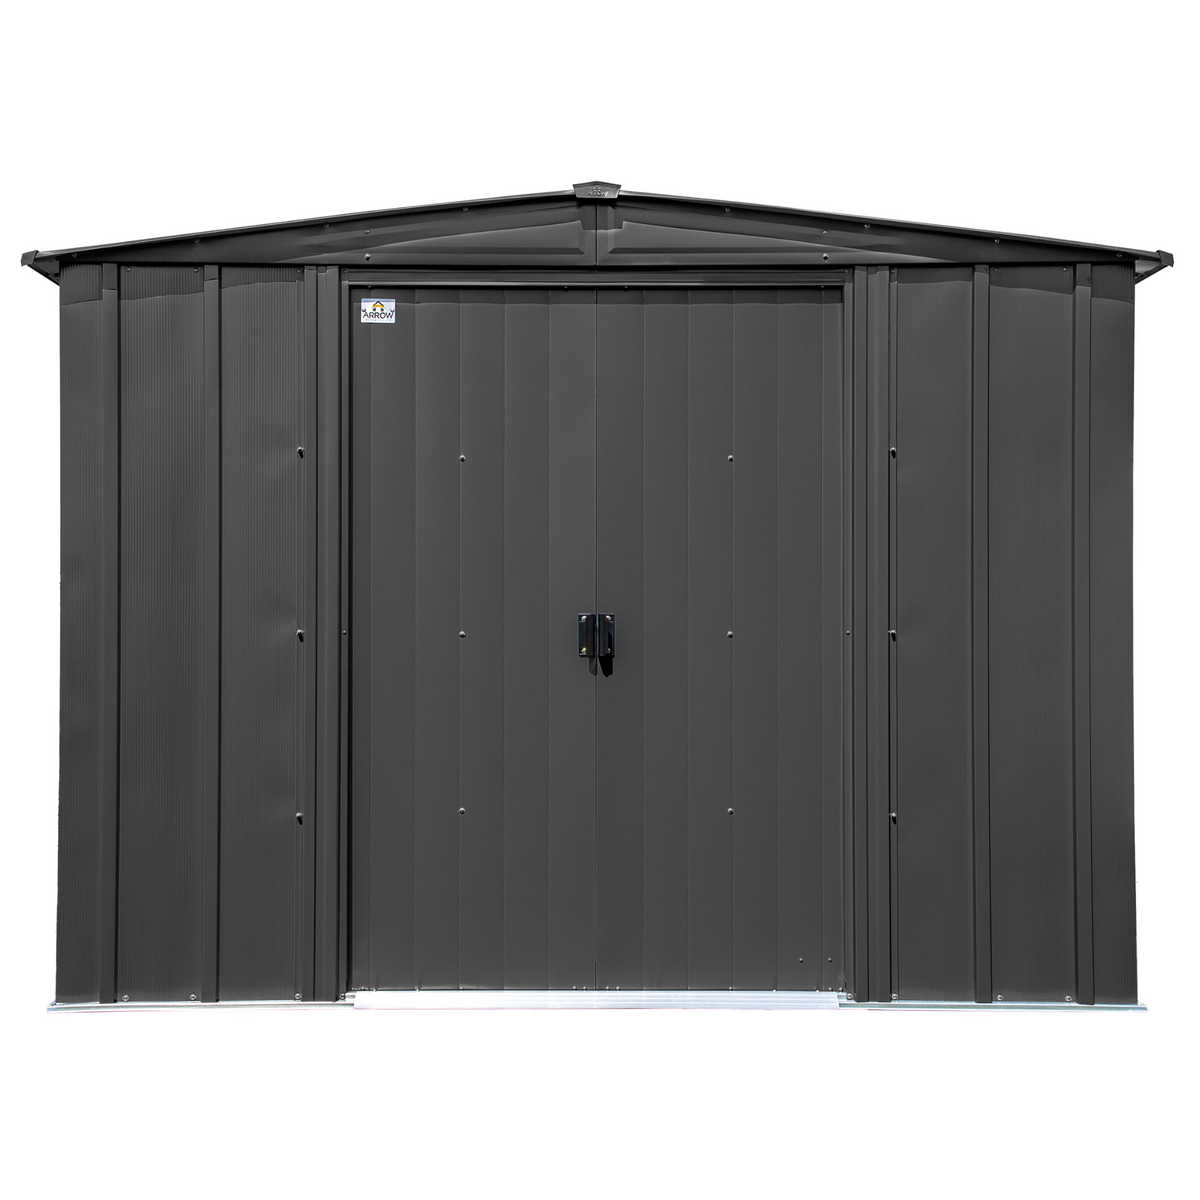 Arrow Classic 8 Ft X 6 Ft Steel Storage Shed Sheds Express 7532